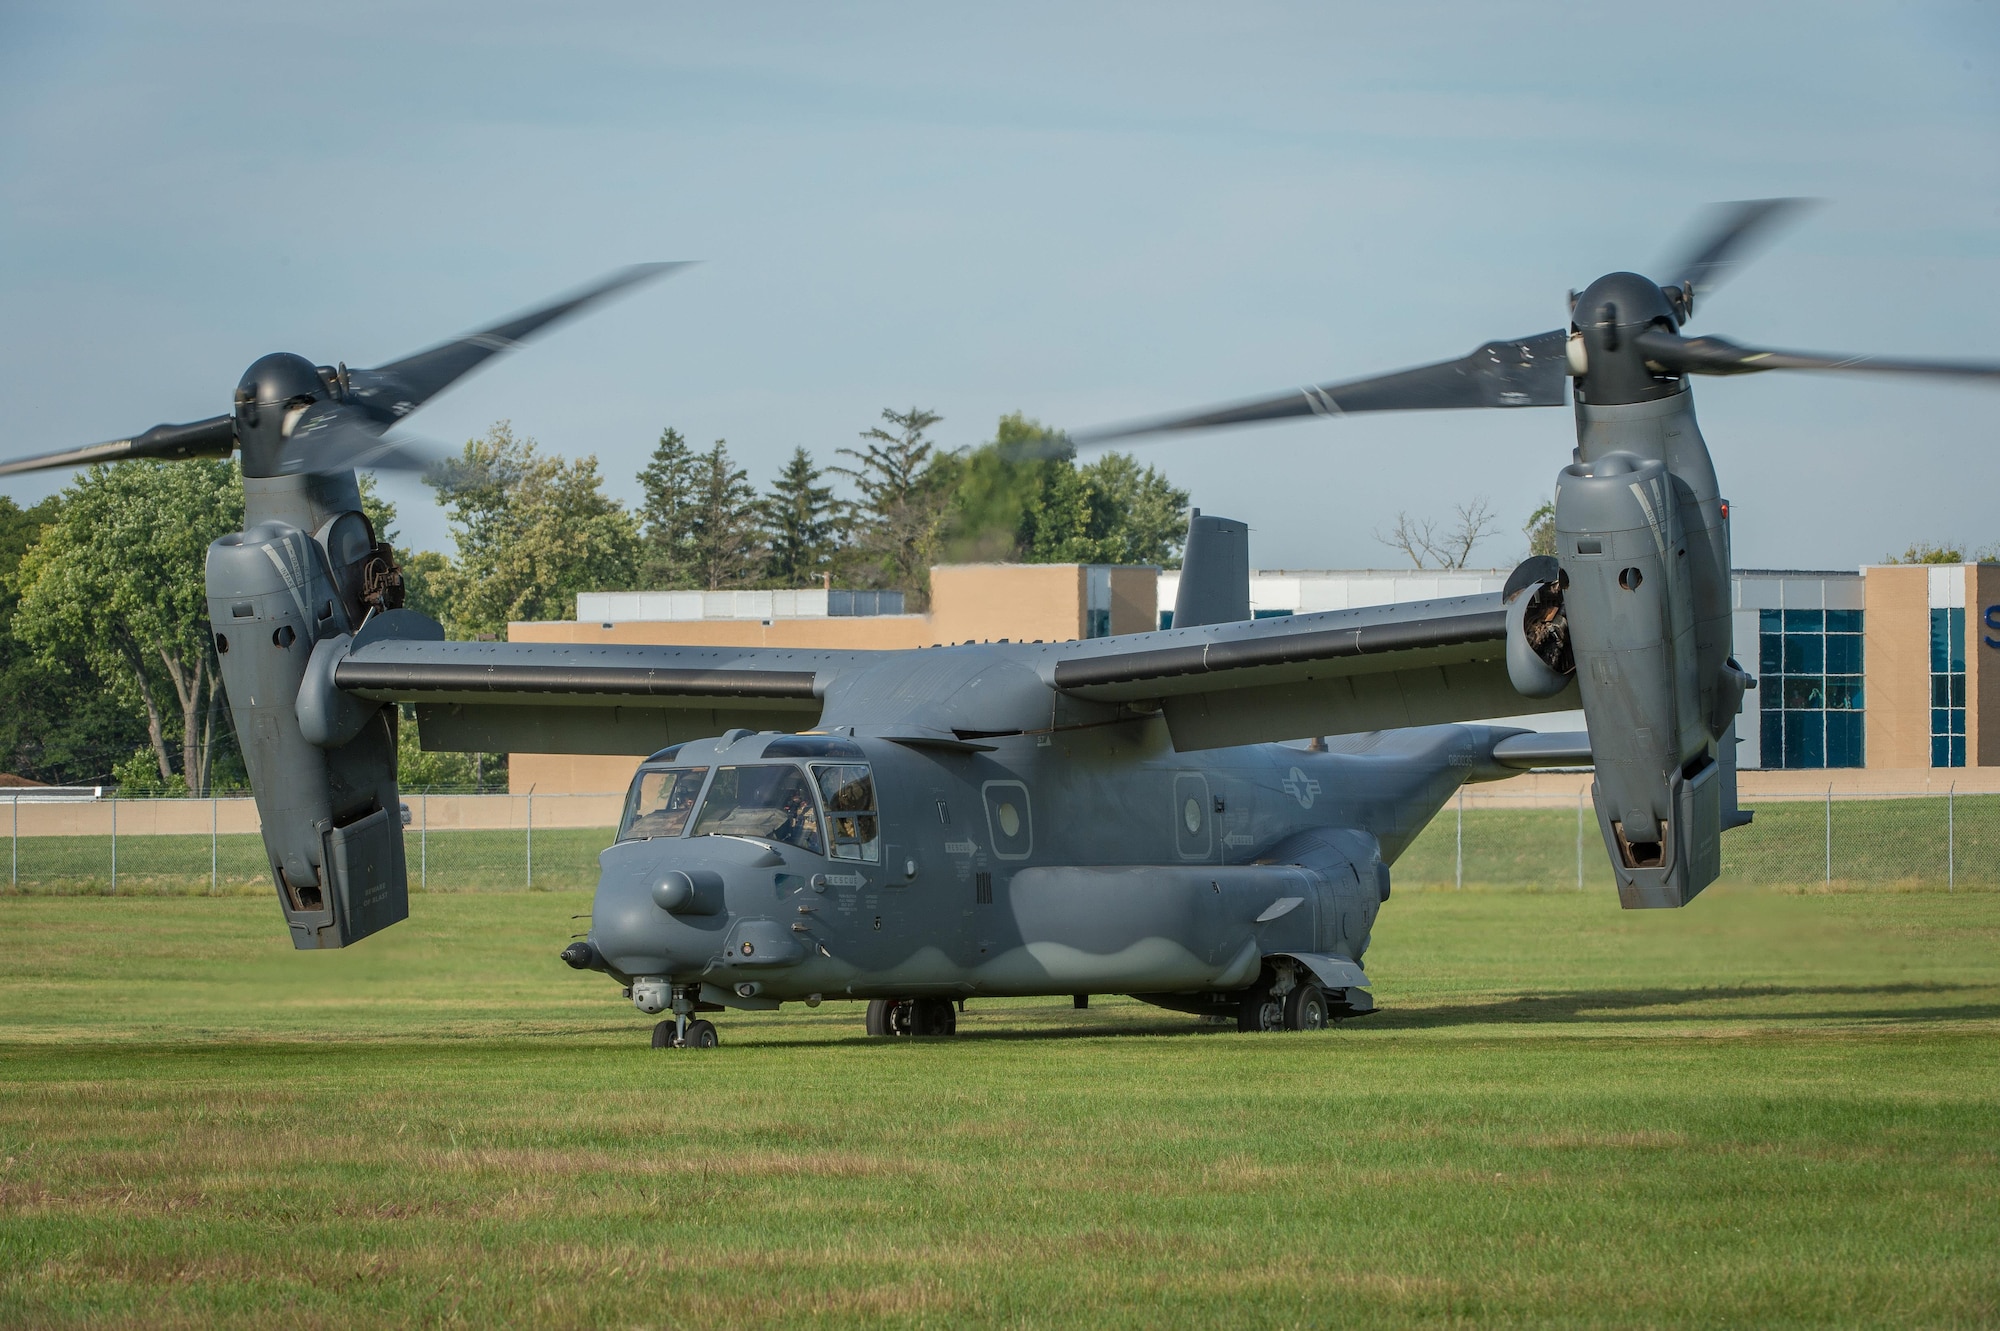 DAYTON, Ohio -- A CV-22 Osprey aircraft assigned to the 20th Special Operations Squadron at Cannon Air Force Base, N.M., lands at the National Museum of the United States Air Force, Sept. 15, 2016 before the Green Hornet Dedication ceremony. The aircraft and crew landed at the museum in tribute to the Green Hornets. (U.S. Air Force photo by Jim Copes)